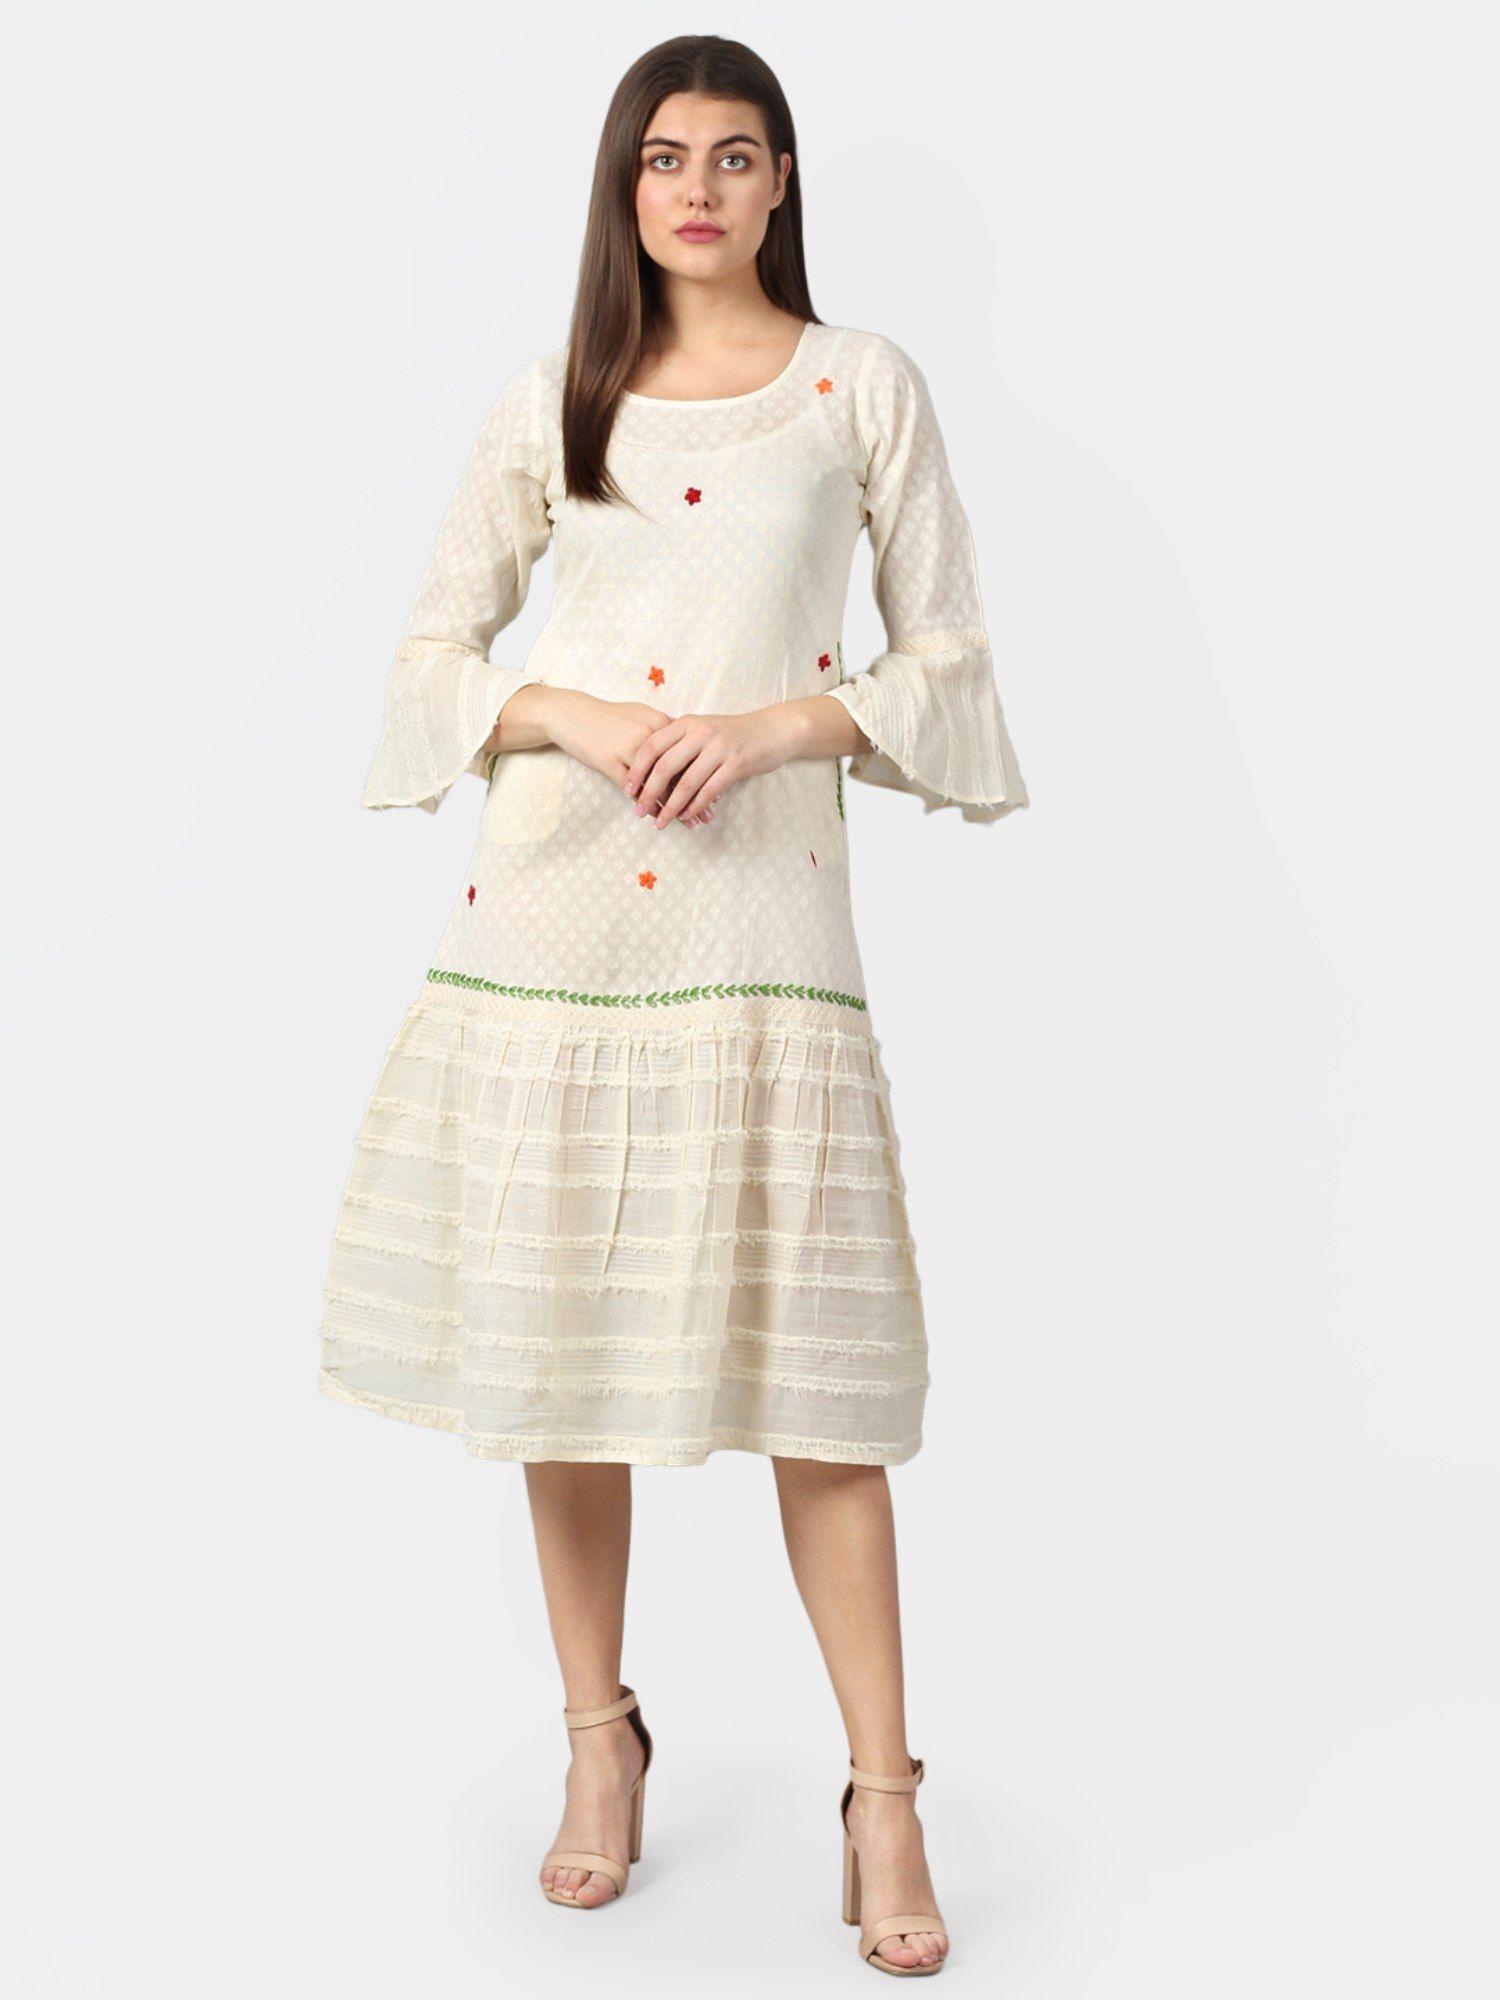 hand embroidery on cotton dress-white